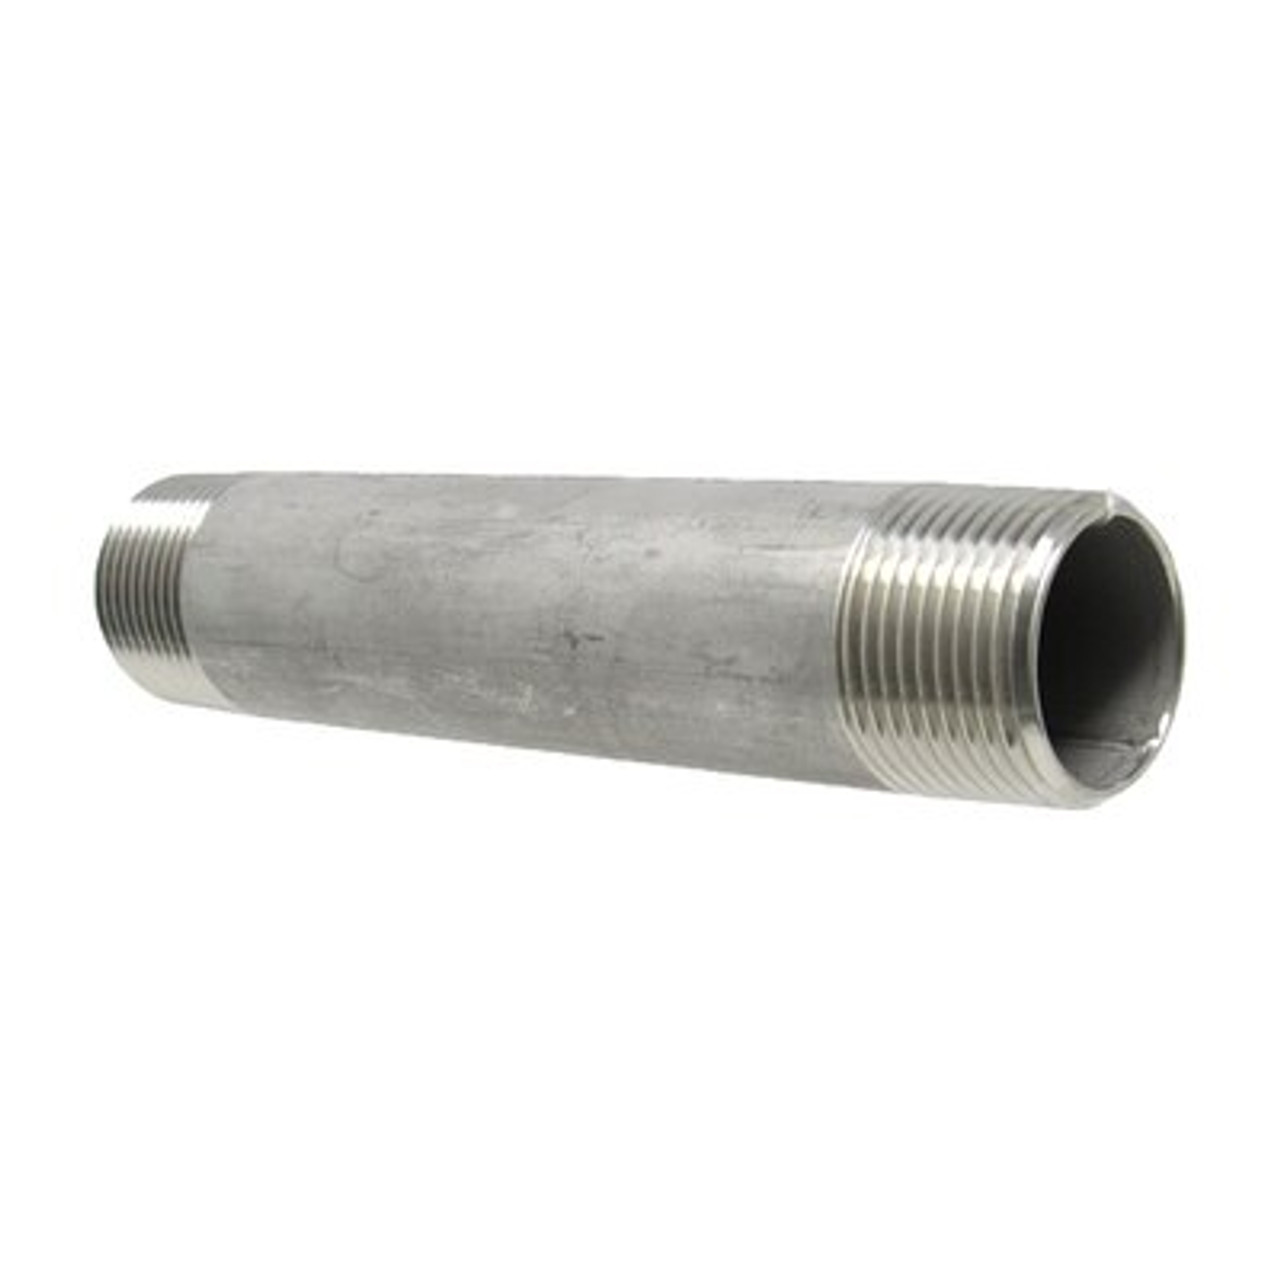 1/2 x 5" Stainless Steel 316 Male NPT Pipe Nipple  SS113-D5